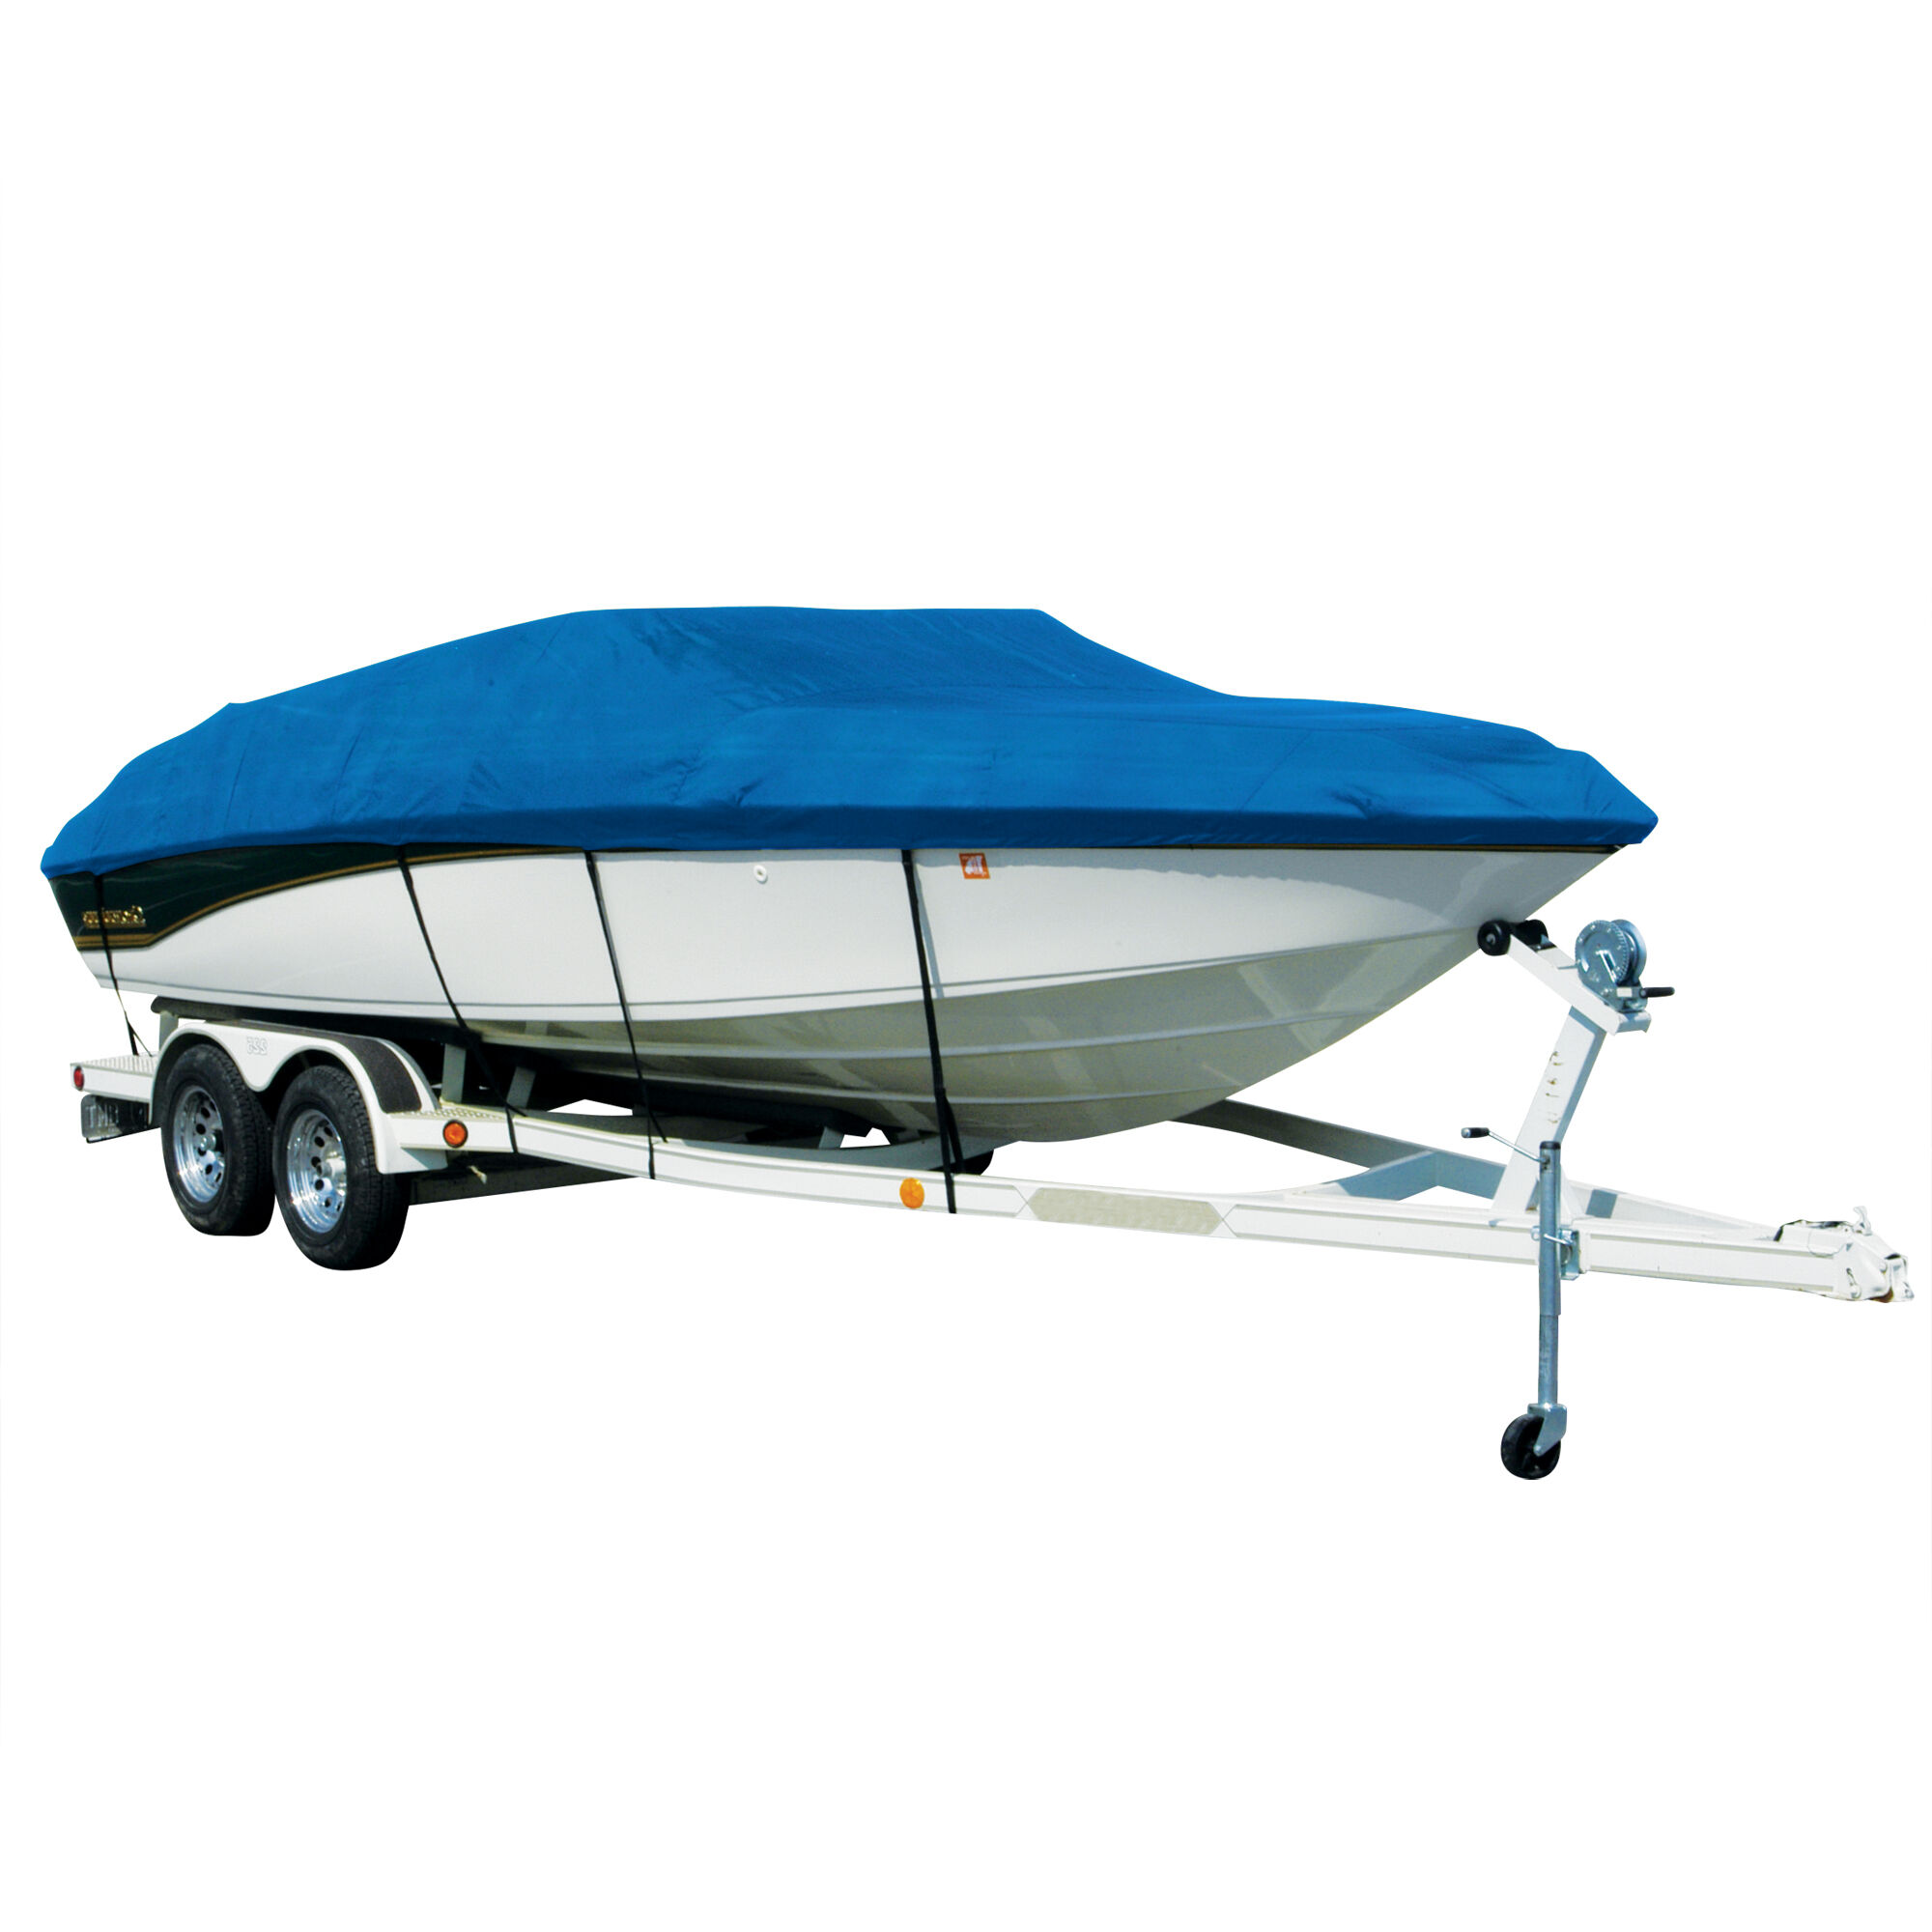 Covermate Exact Fit Sharkskin Boat Cover For Supreme 19 Cs Does Not Cover PLATFORMm in Blue